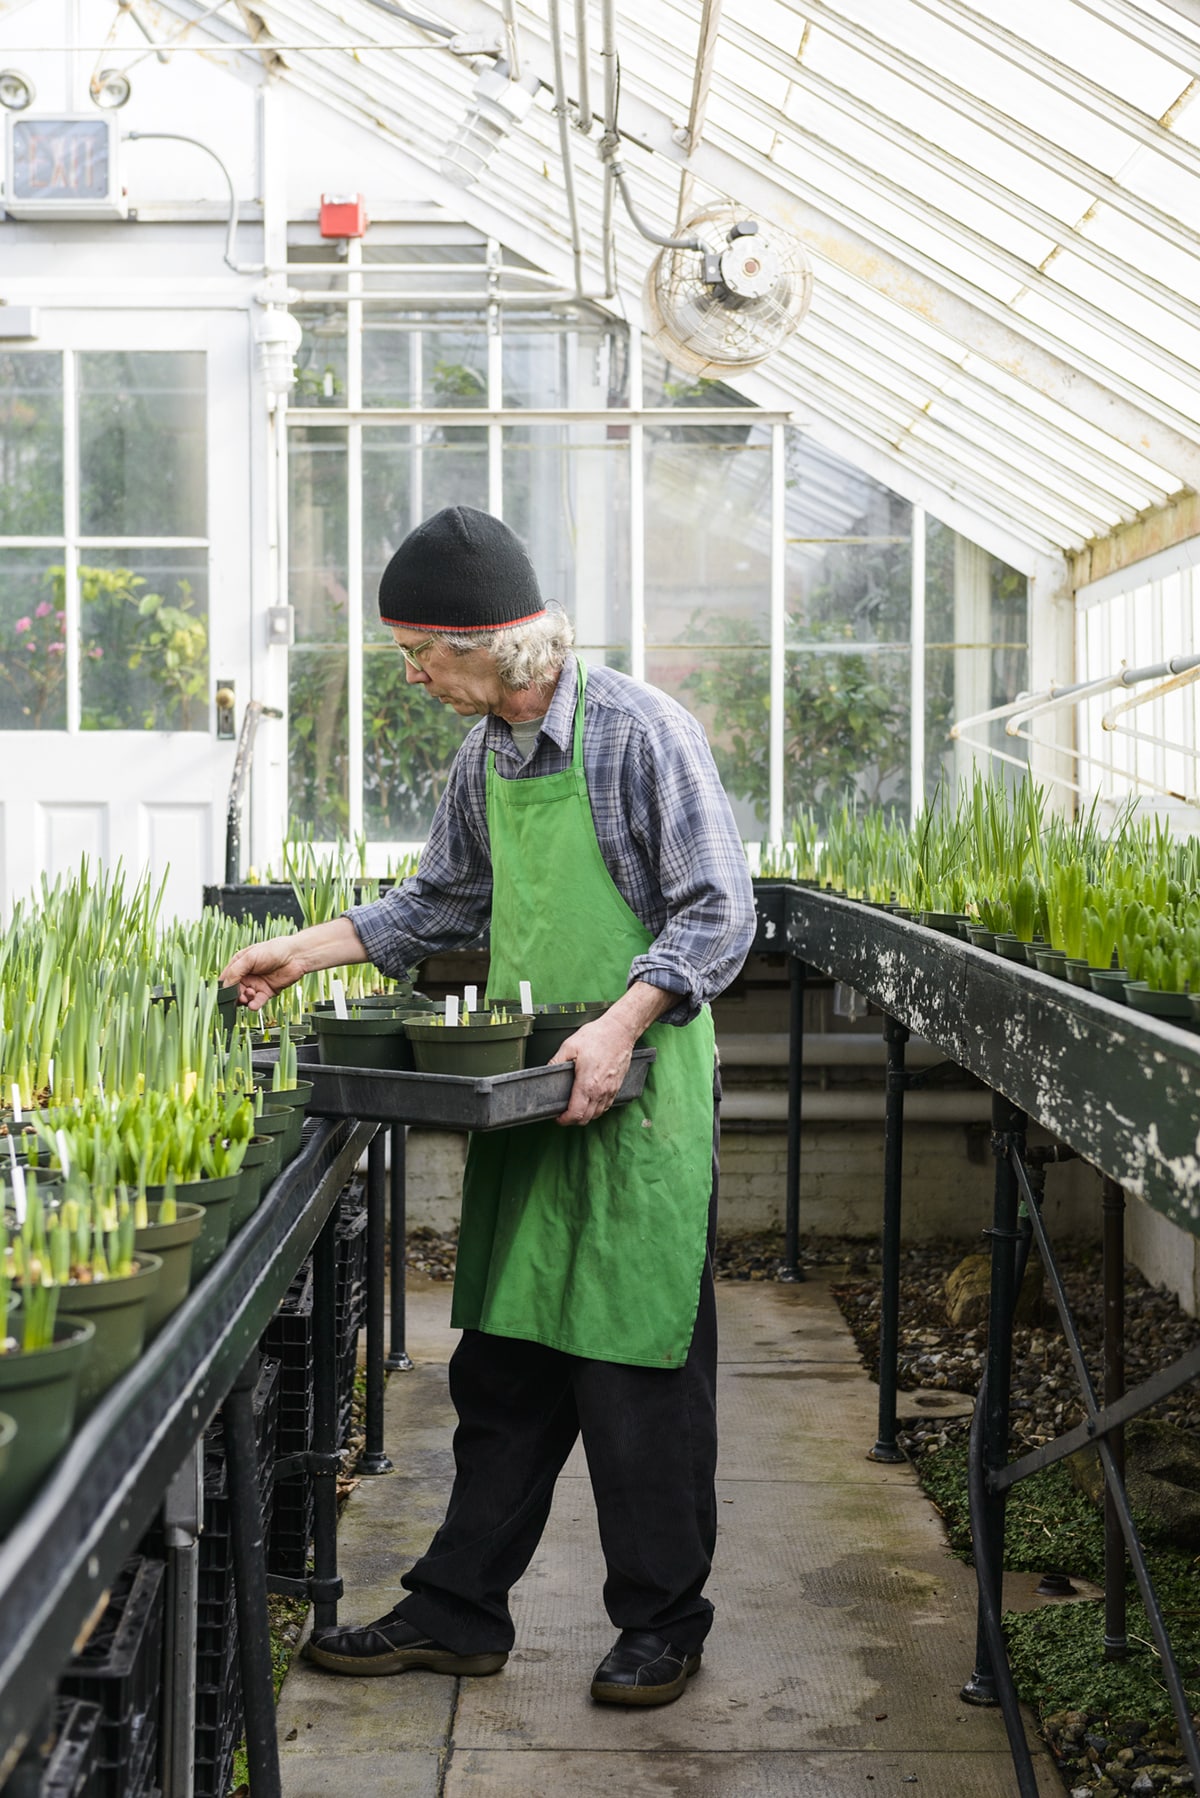 Former Conservatory Manager Rob Nicholson working with bulbs for the annual spring flower show that takes place at the Botanic Garden at Smith College in late March.